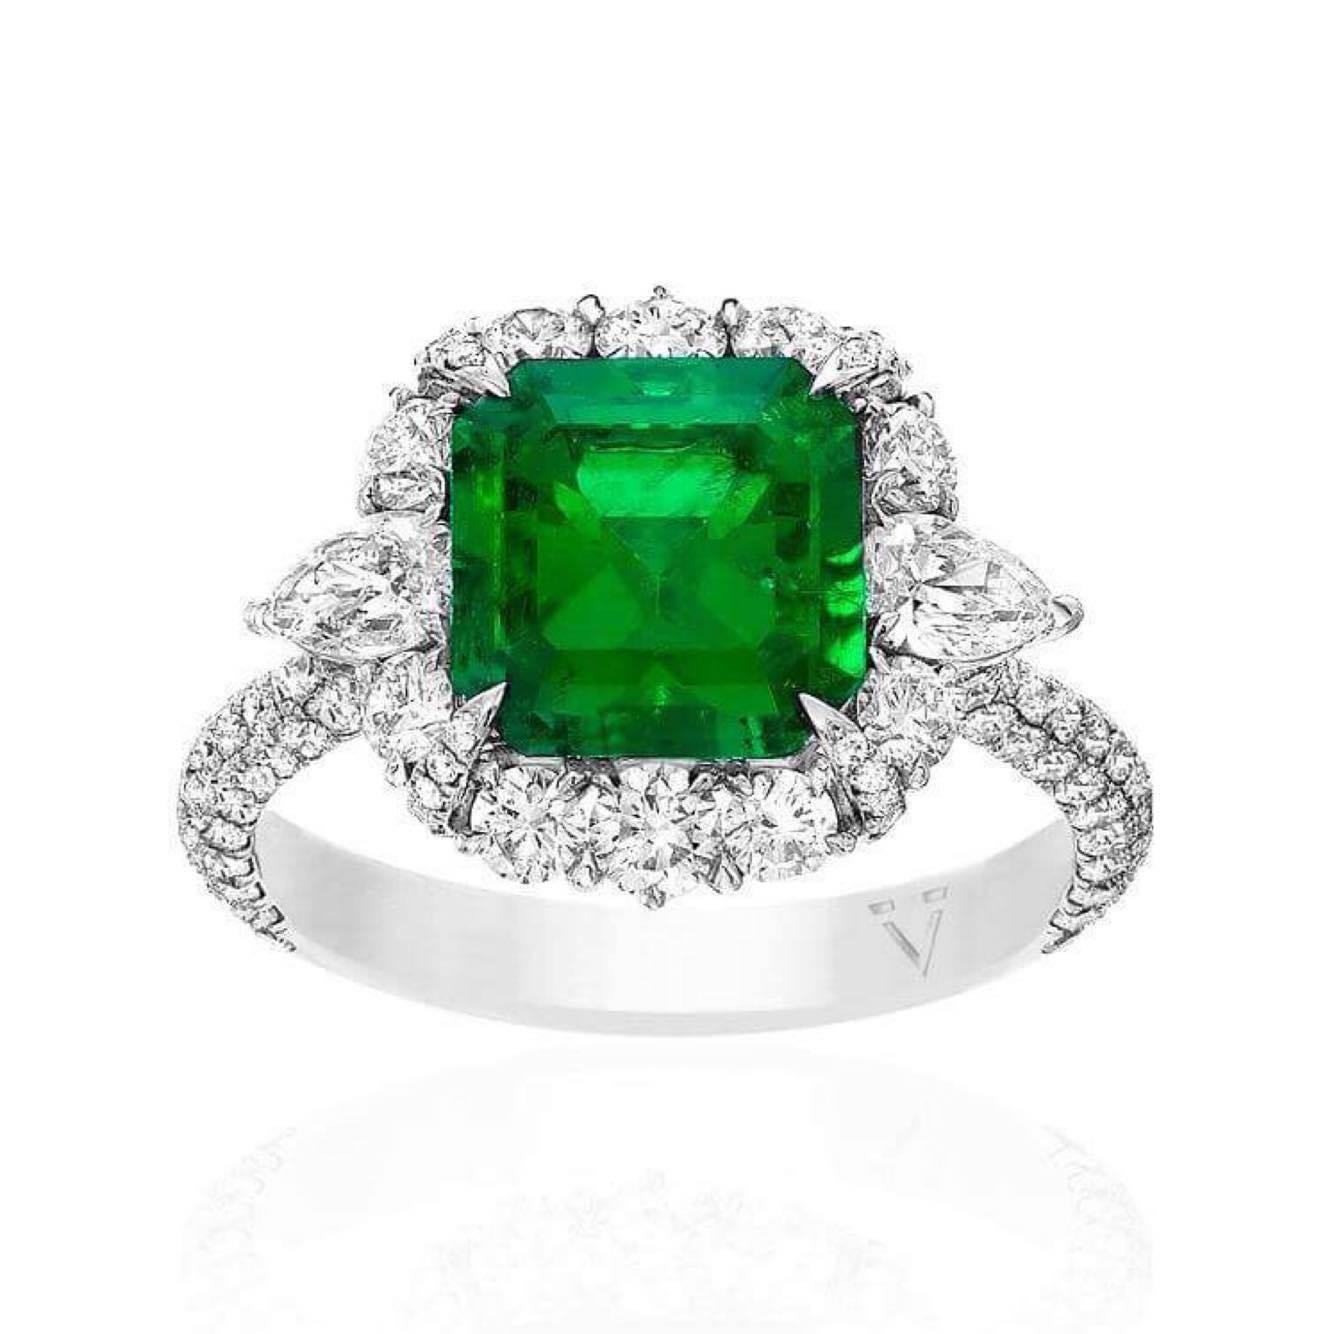 Magnificent 4.57 Carat Colombian Emerald  Diamond Ring 